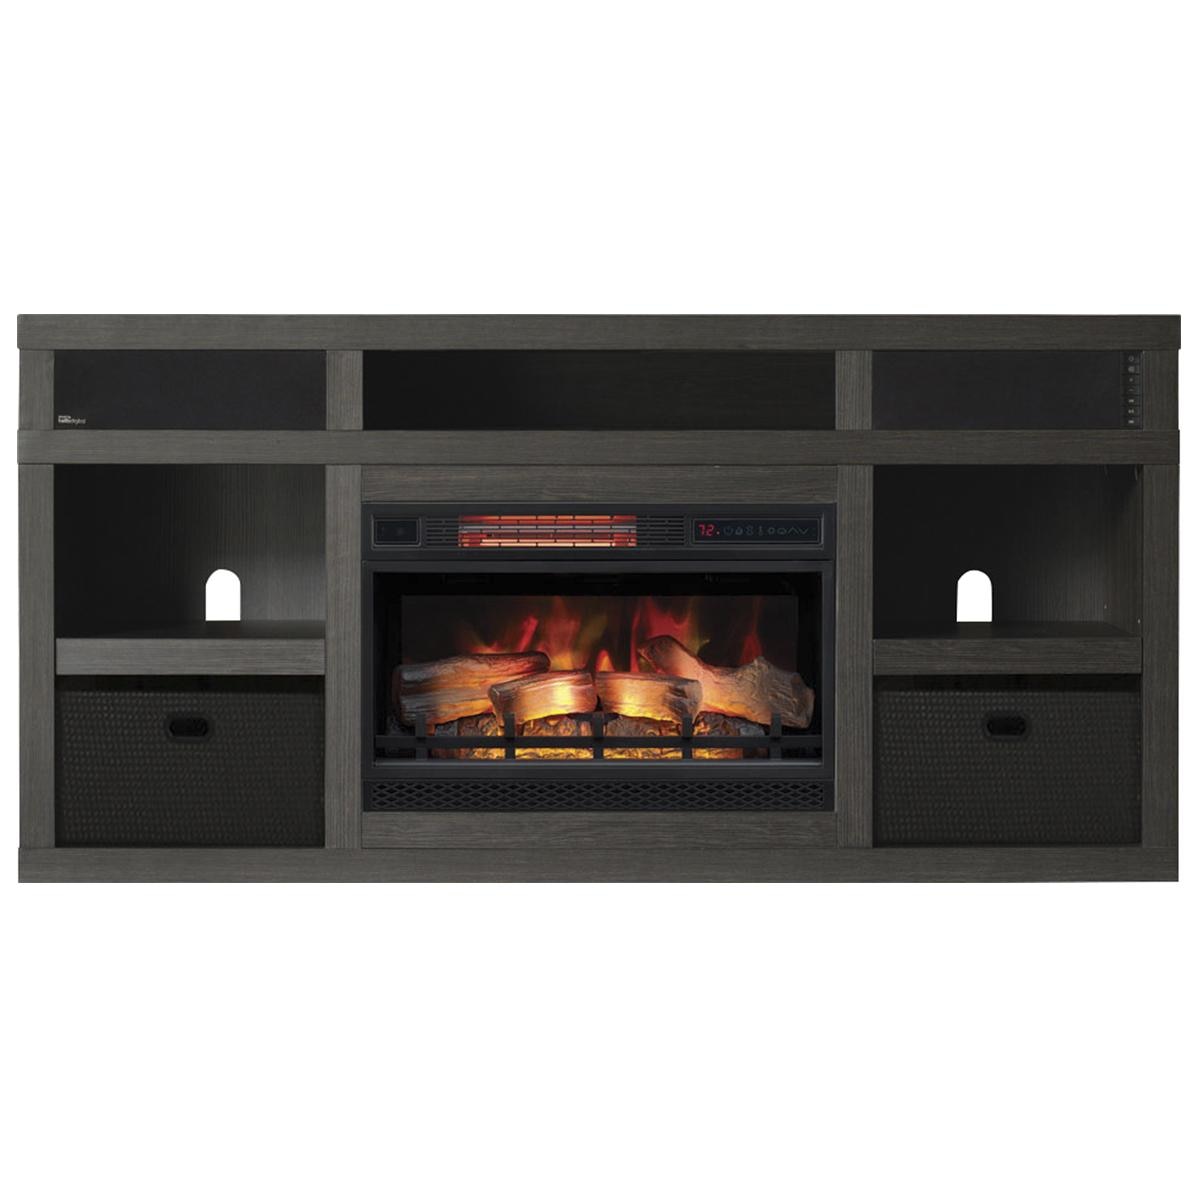 Fireplace Cover Up Best Of Fabio Flames Greatlin 3 Piece Fireplace Entertainment Wall